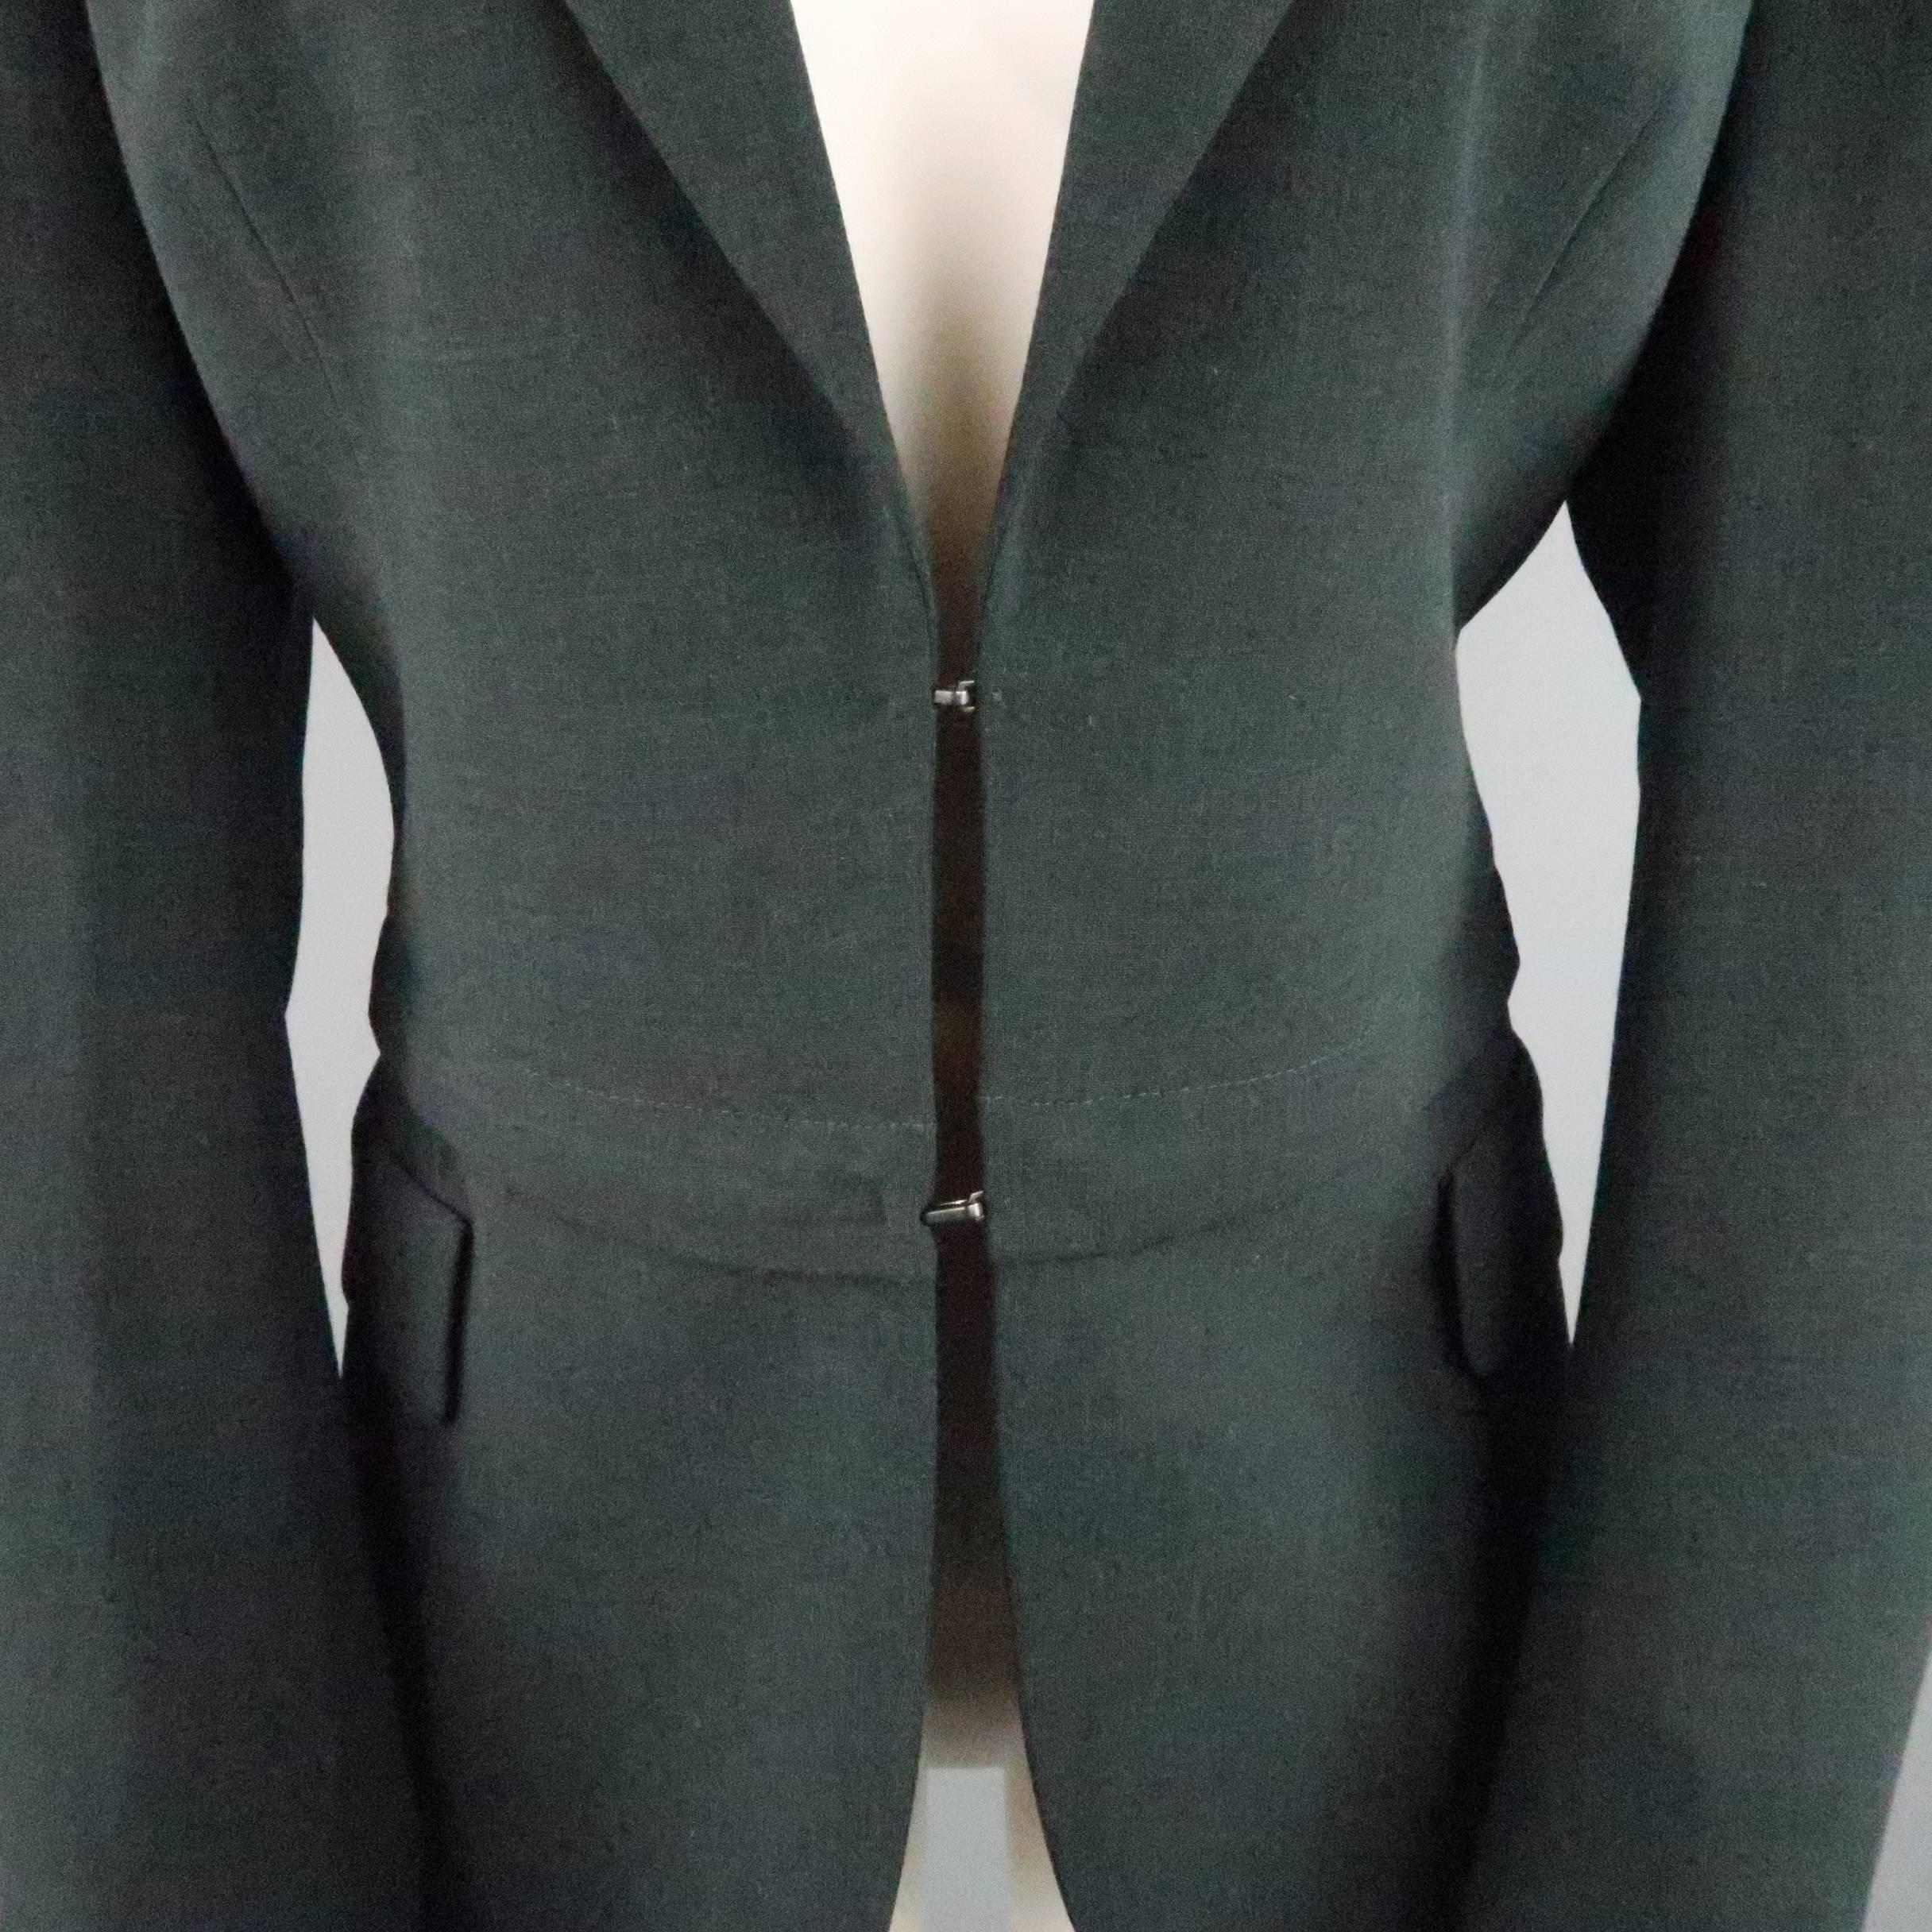 AKRIS blazer comes in forest green wool fabric and features a classic notch lapel, double hook eye closure, and detachable zip off panel with faux flap pockets. Made in Switzerland.
 
Excellent Pre-Owned Condition.
Marked: US 10
 
Measurements:
